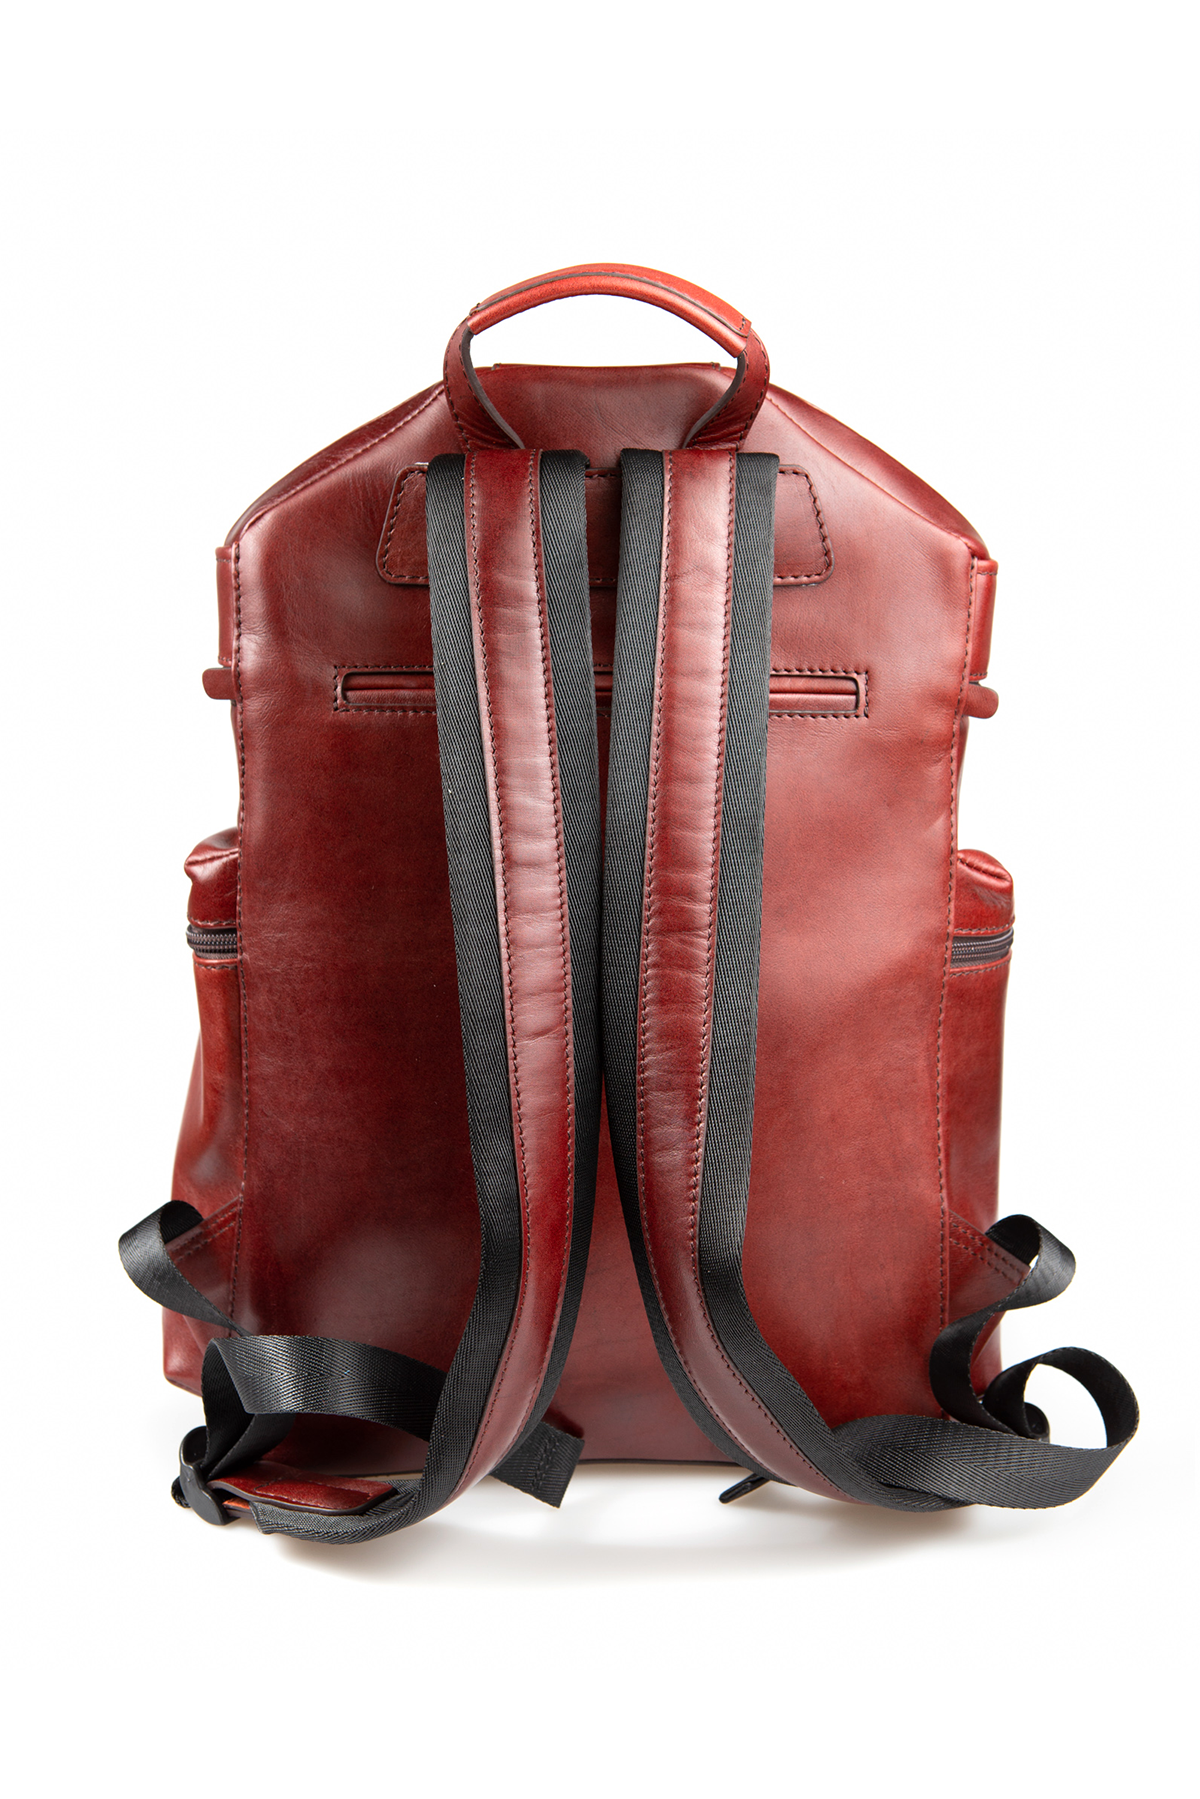 A genuine leather backpack as seen from a rear-facing view